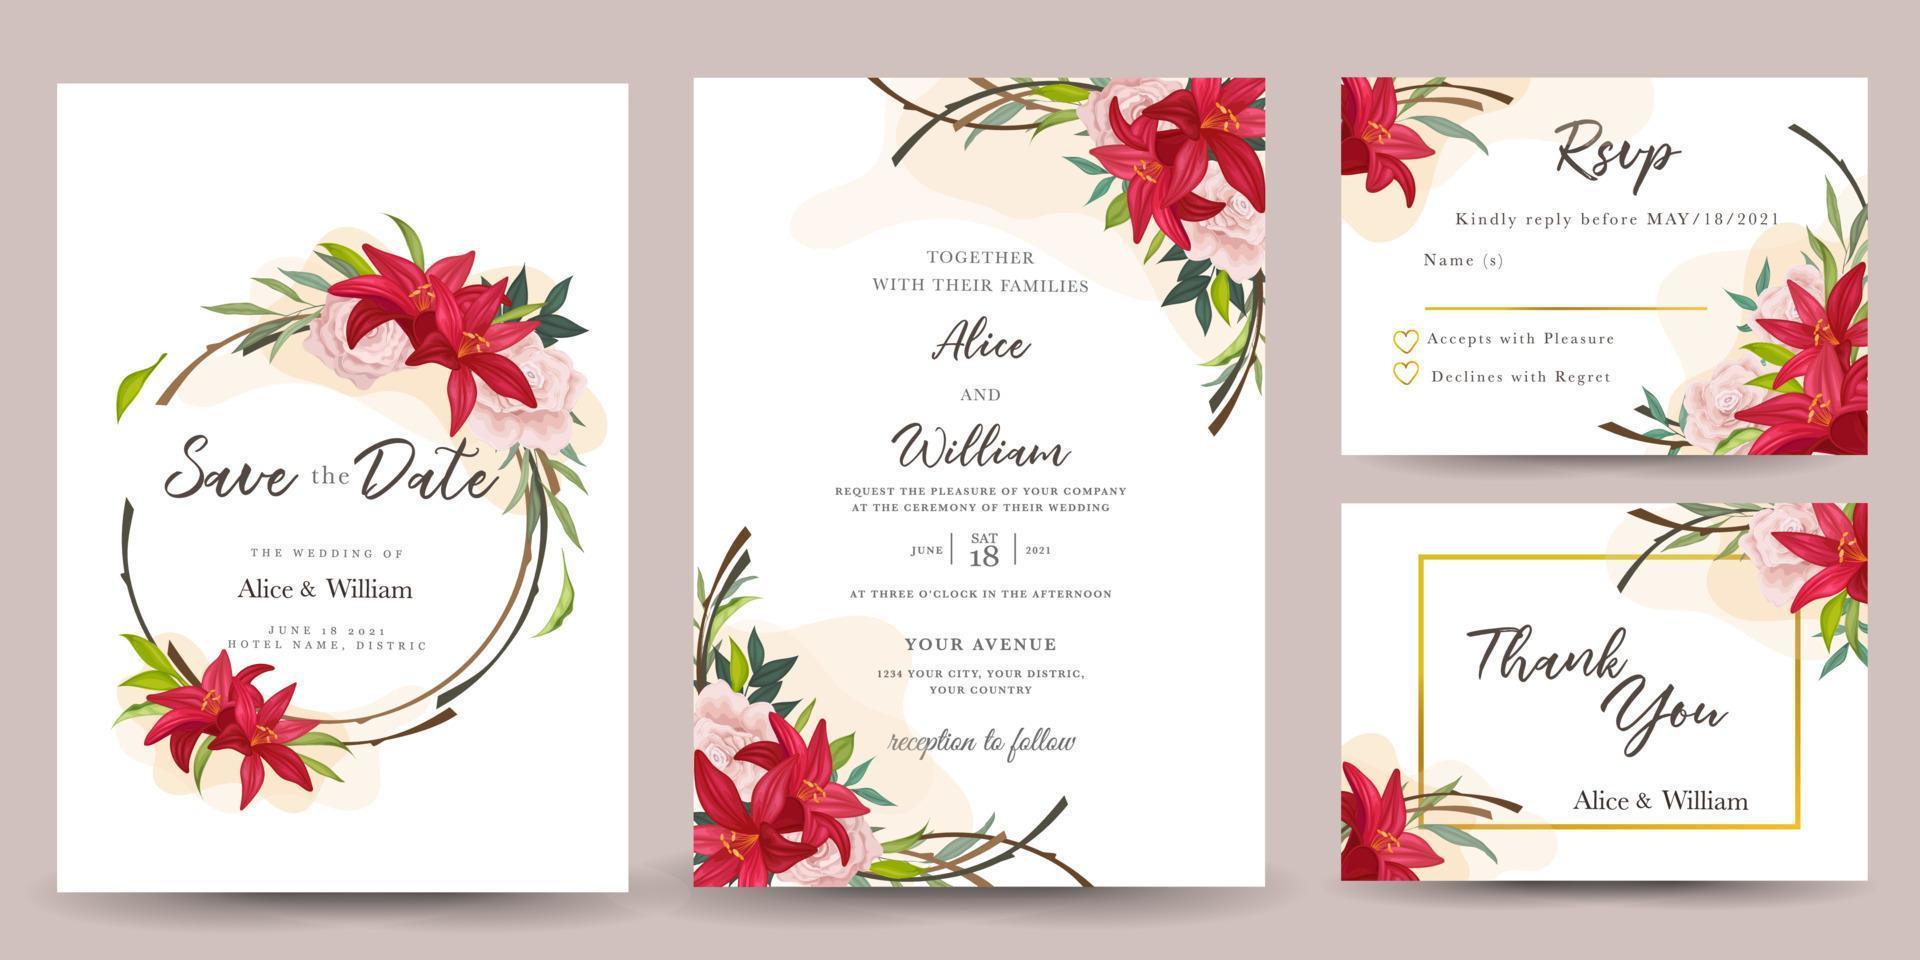 wedding invitation with beautiful floral background vector